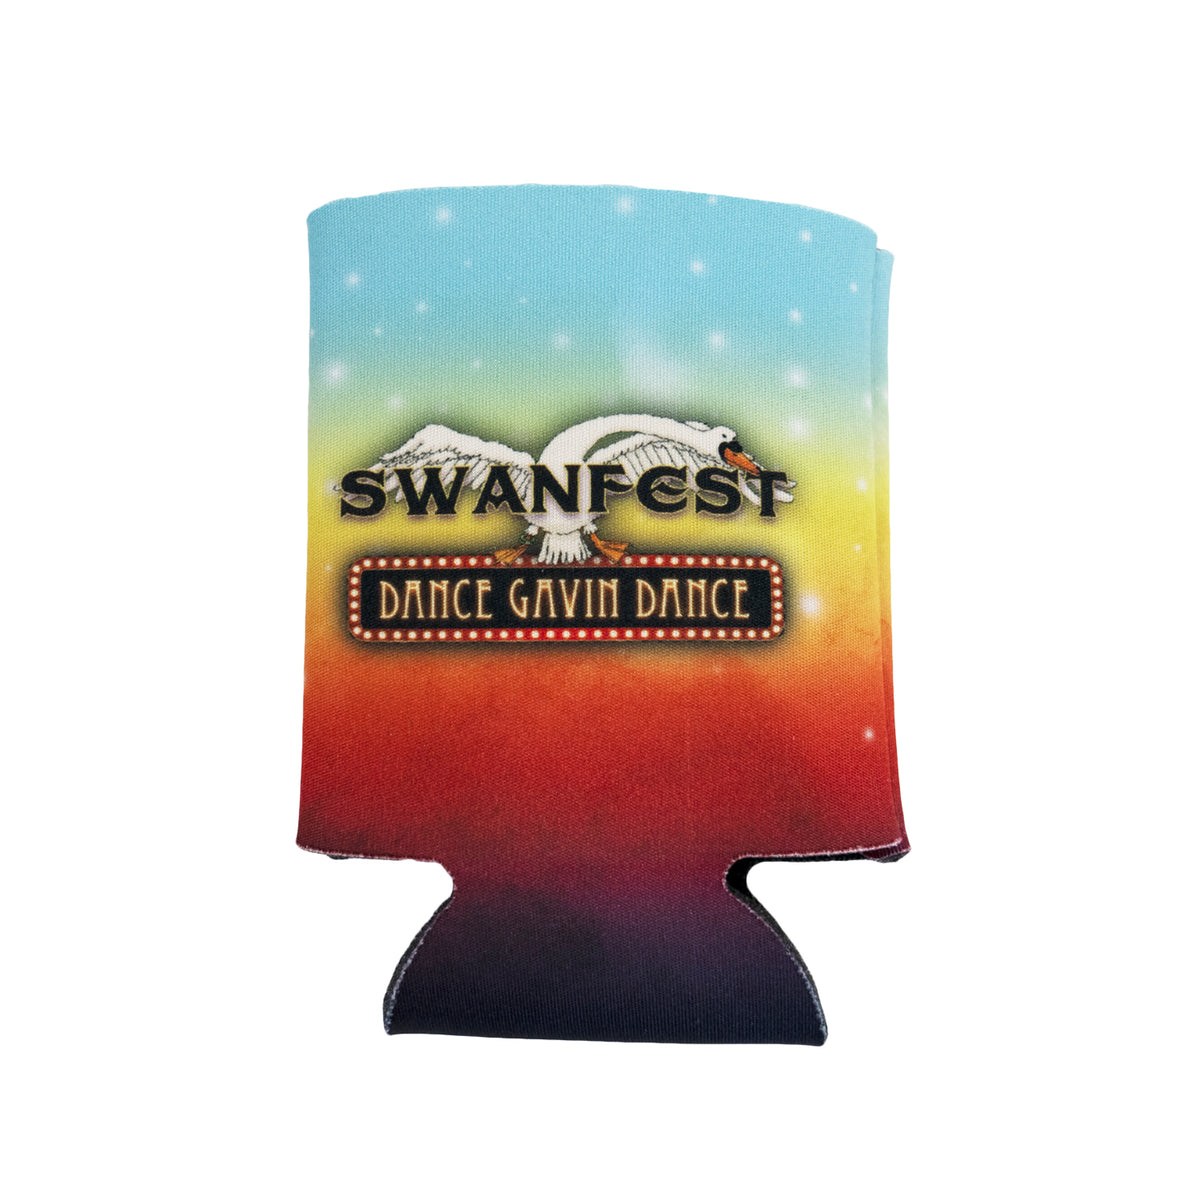 image of a drink koozie for a can on a white background. koozie is blue at the top fading to yellow, orange and purple as it goes down. a swan is on the front with wings stretched out, and says swanfest over it and dance gavin dance below